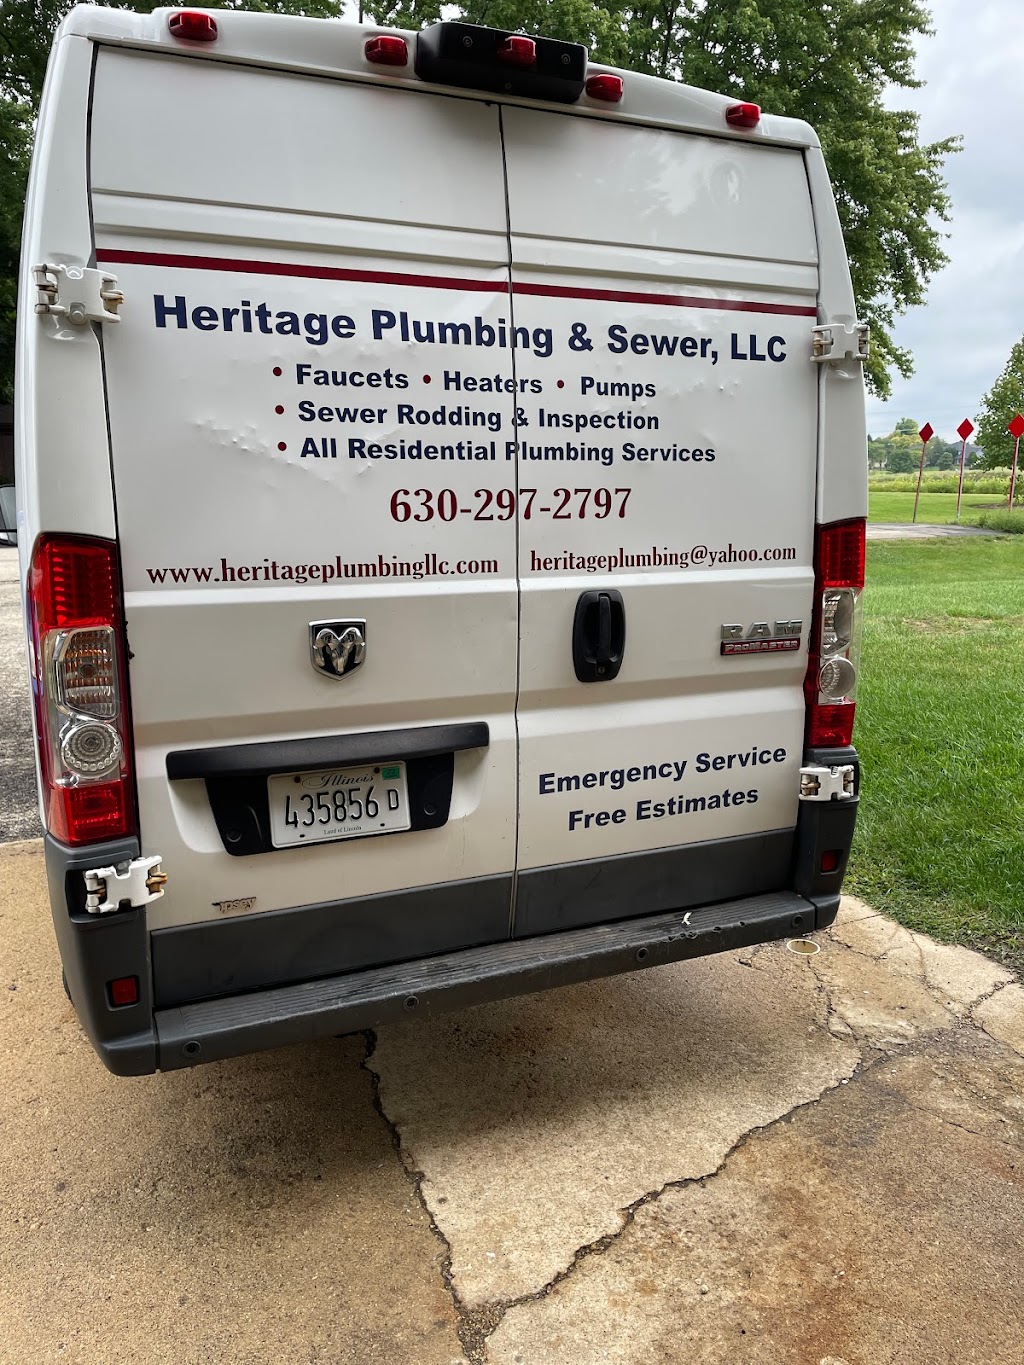 Heritage Plumbing & Sewer LLC | 28W729 Richards Dr, Naperville, IL 60564 | Phone: (630) 297-2797